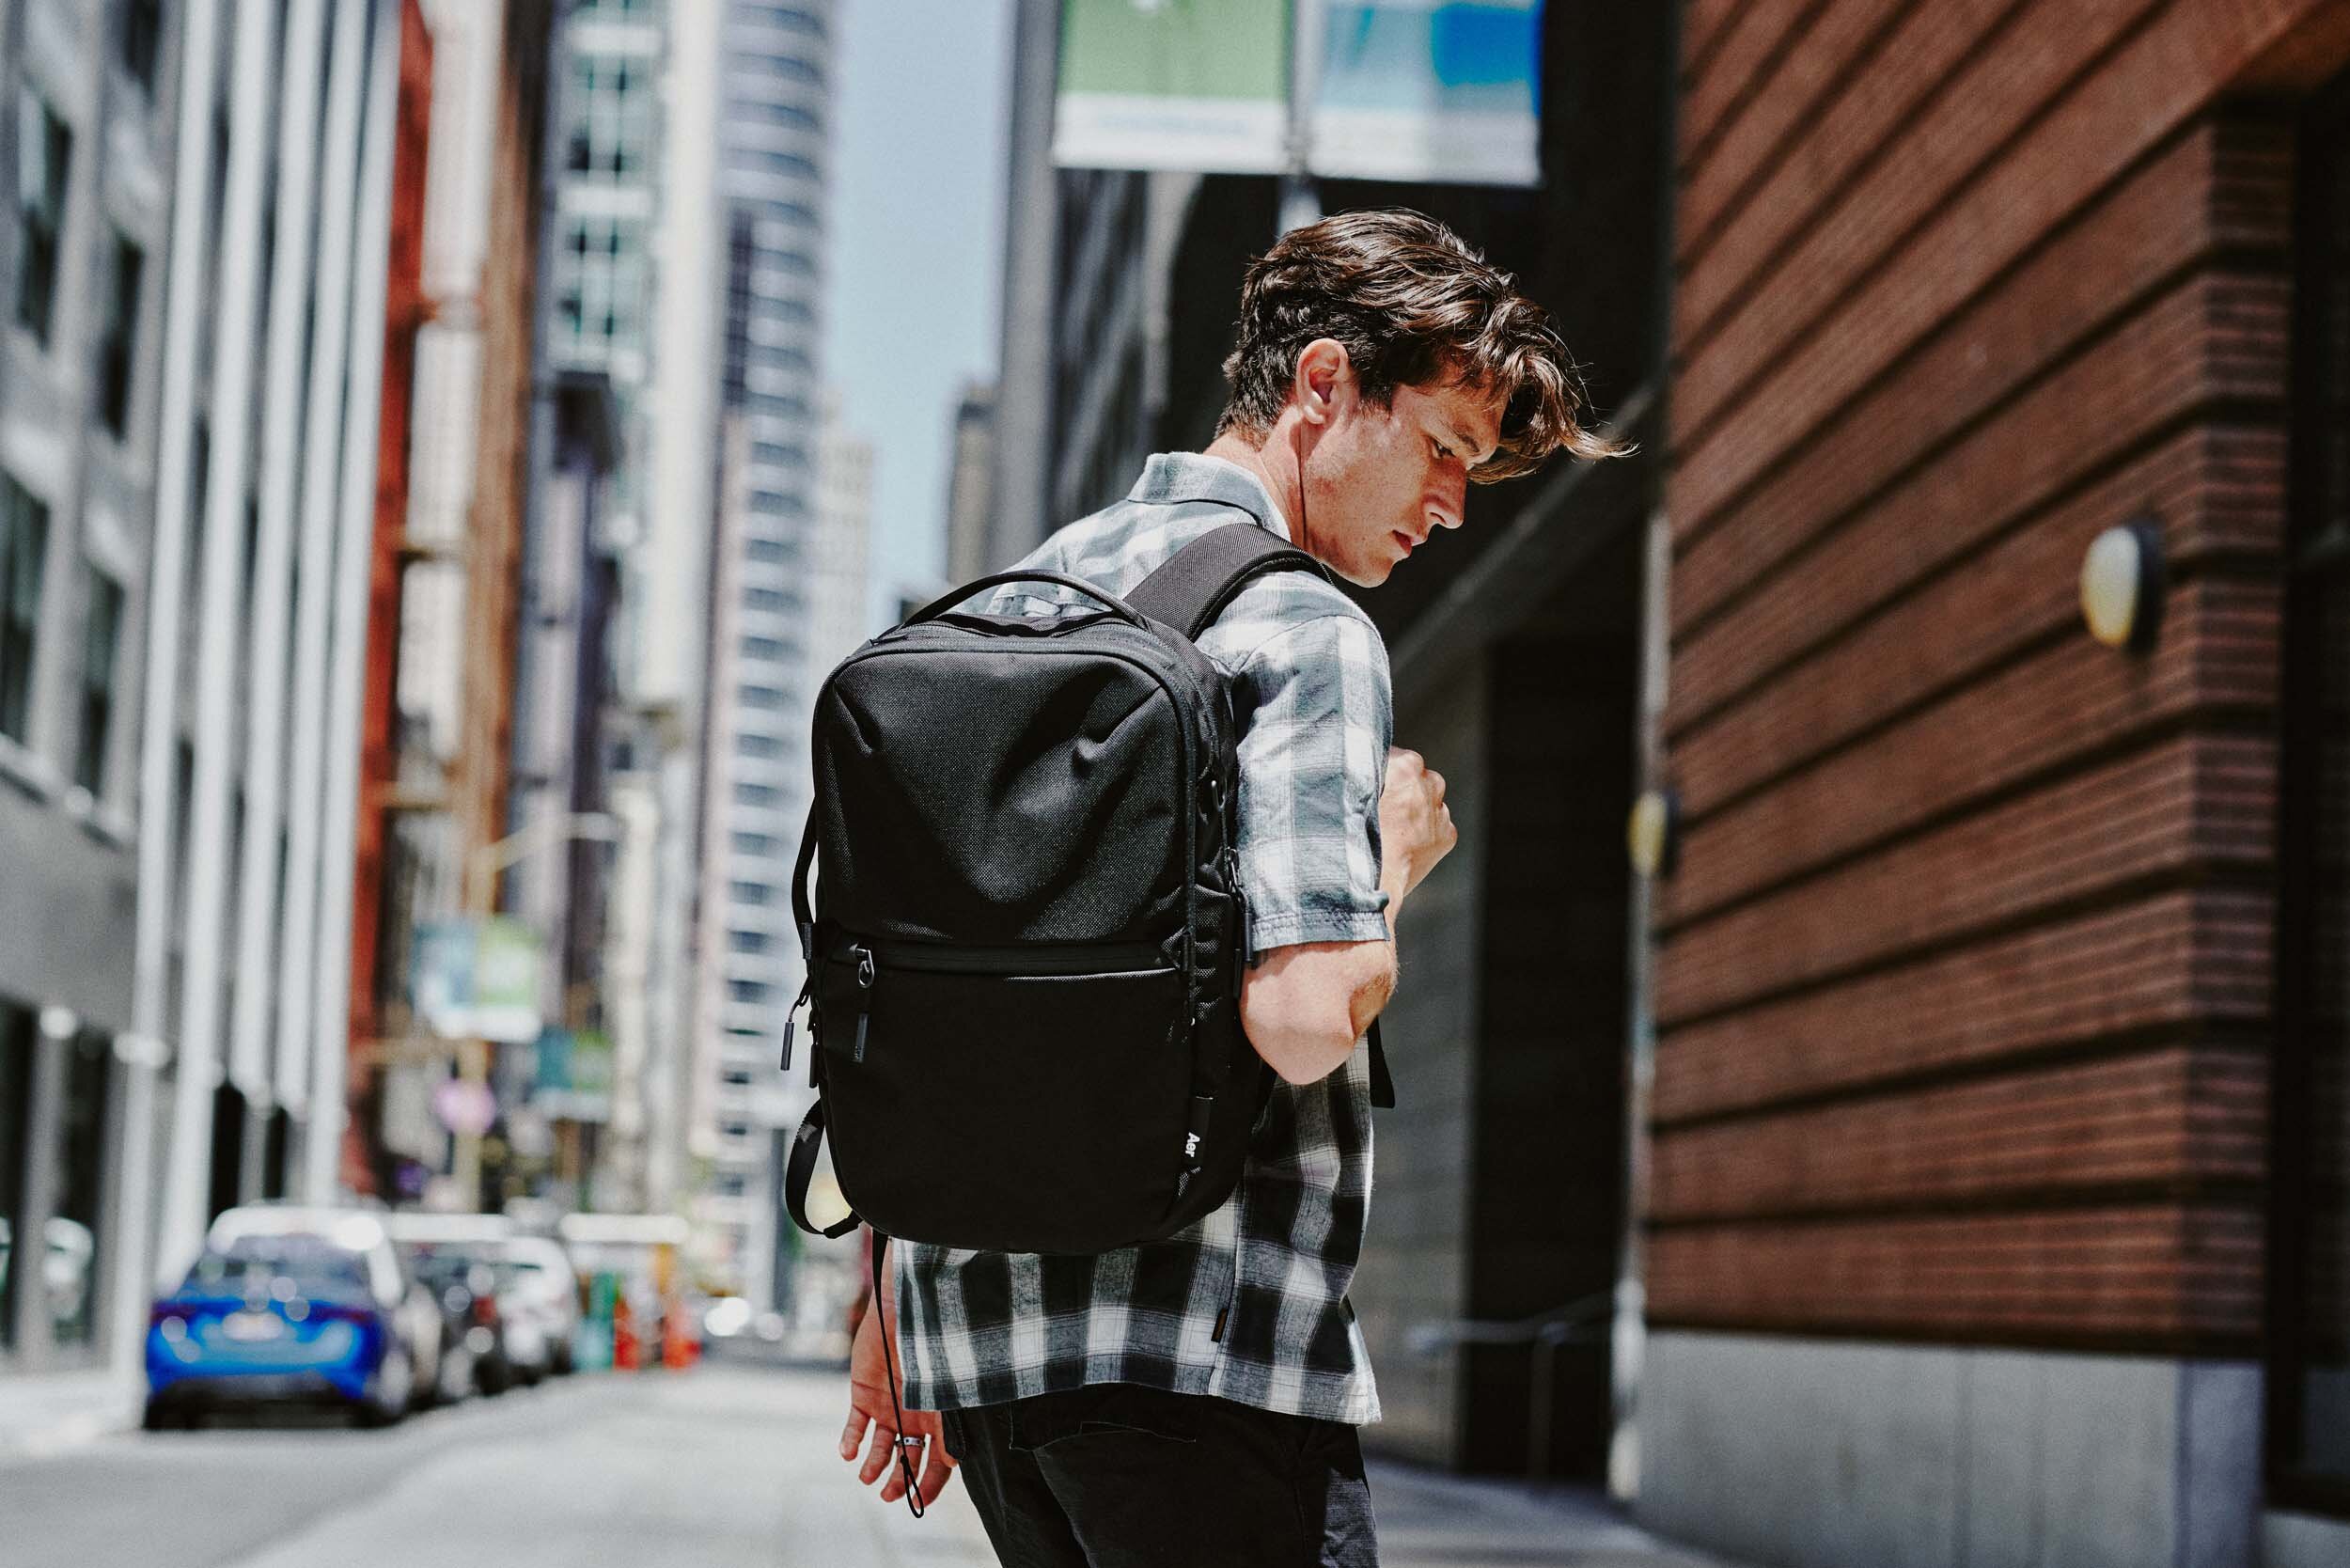 City Pack - Black — Aer | Modern gym bags, travel backpacks and 